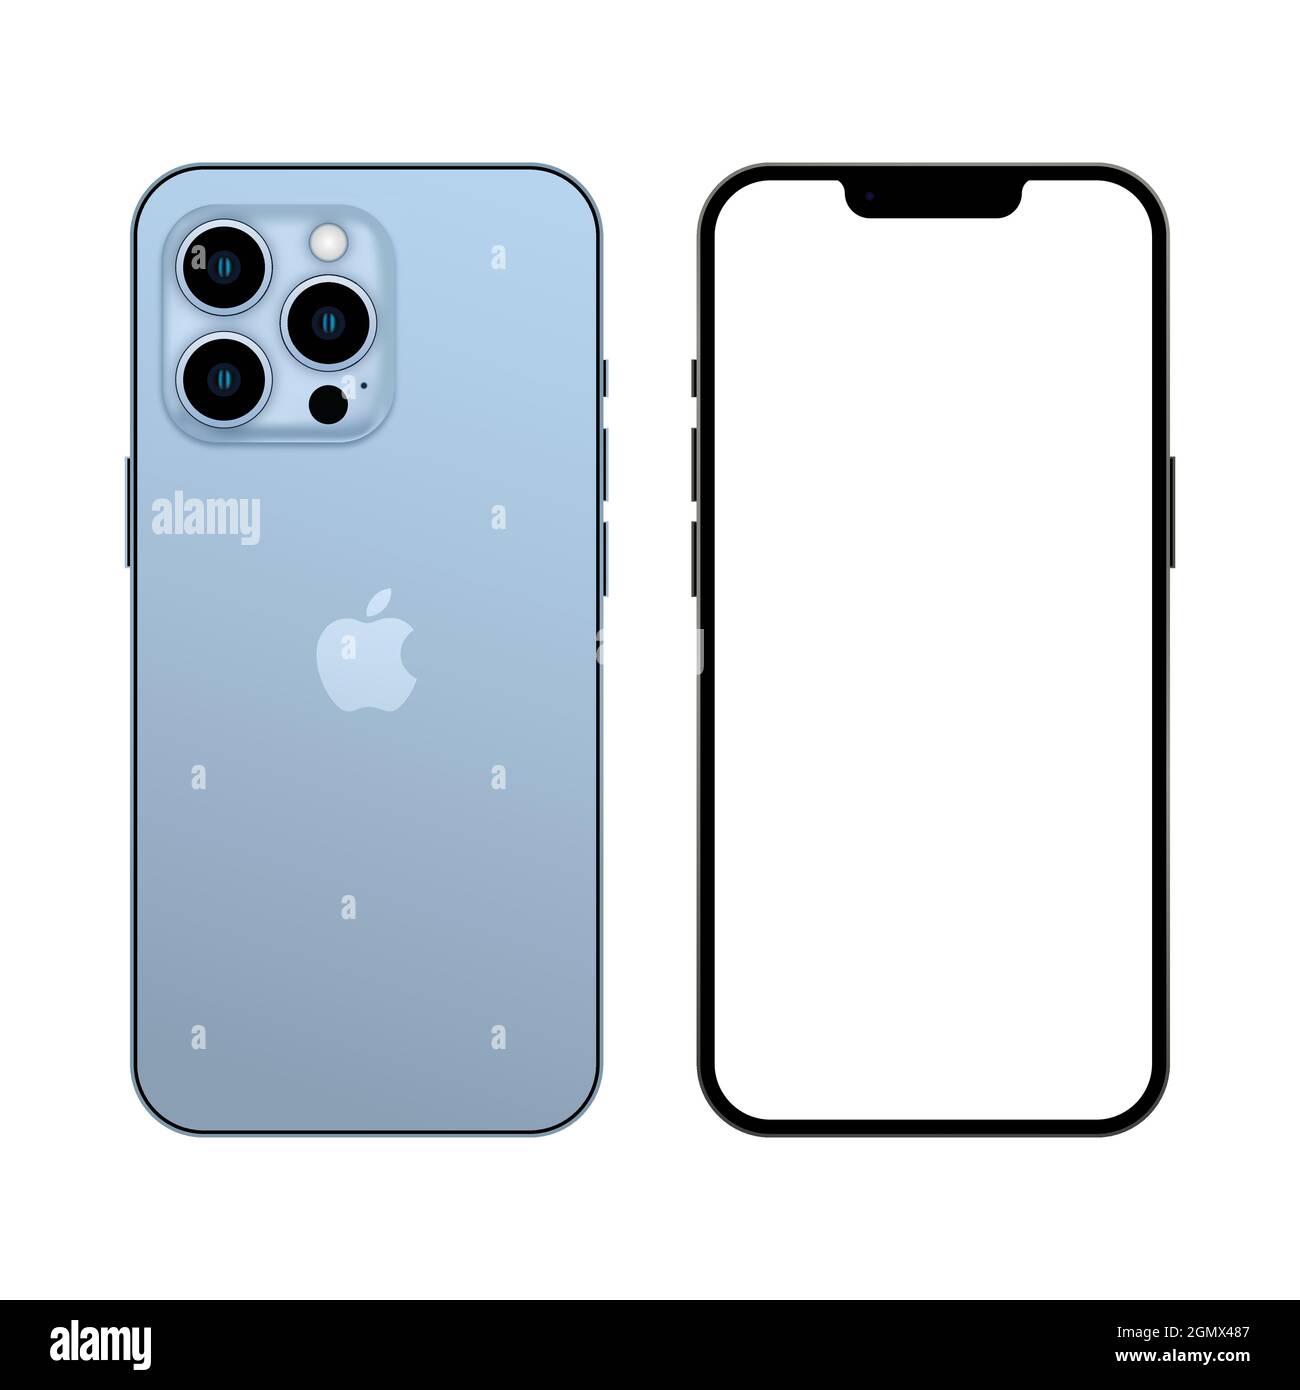 Vinnytsia, Ukraine - September 20, 2021. Newly released iphone 13 pro in sierra blue color, front and back side. Smartphone mock up with white screen. Stock Vector